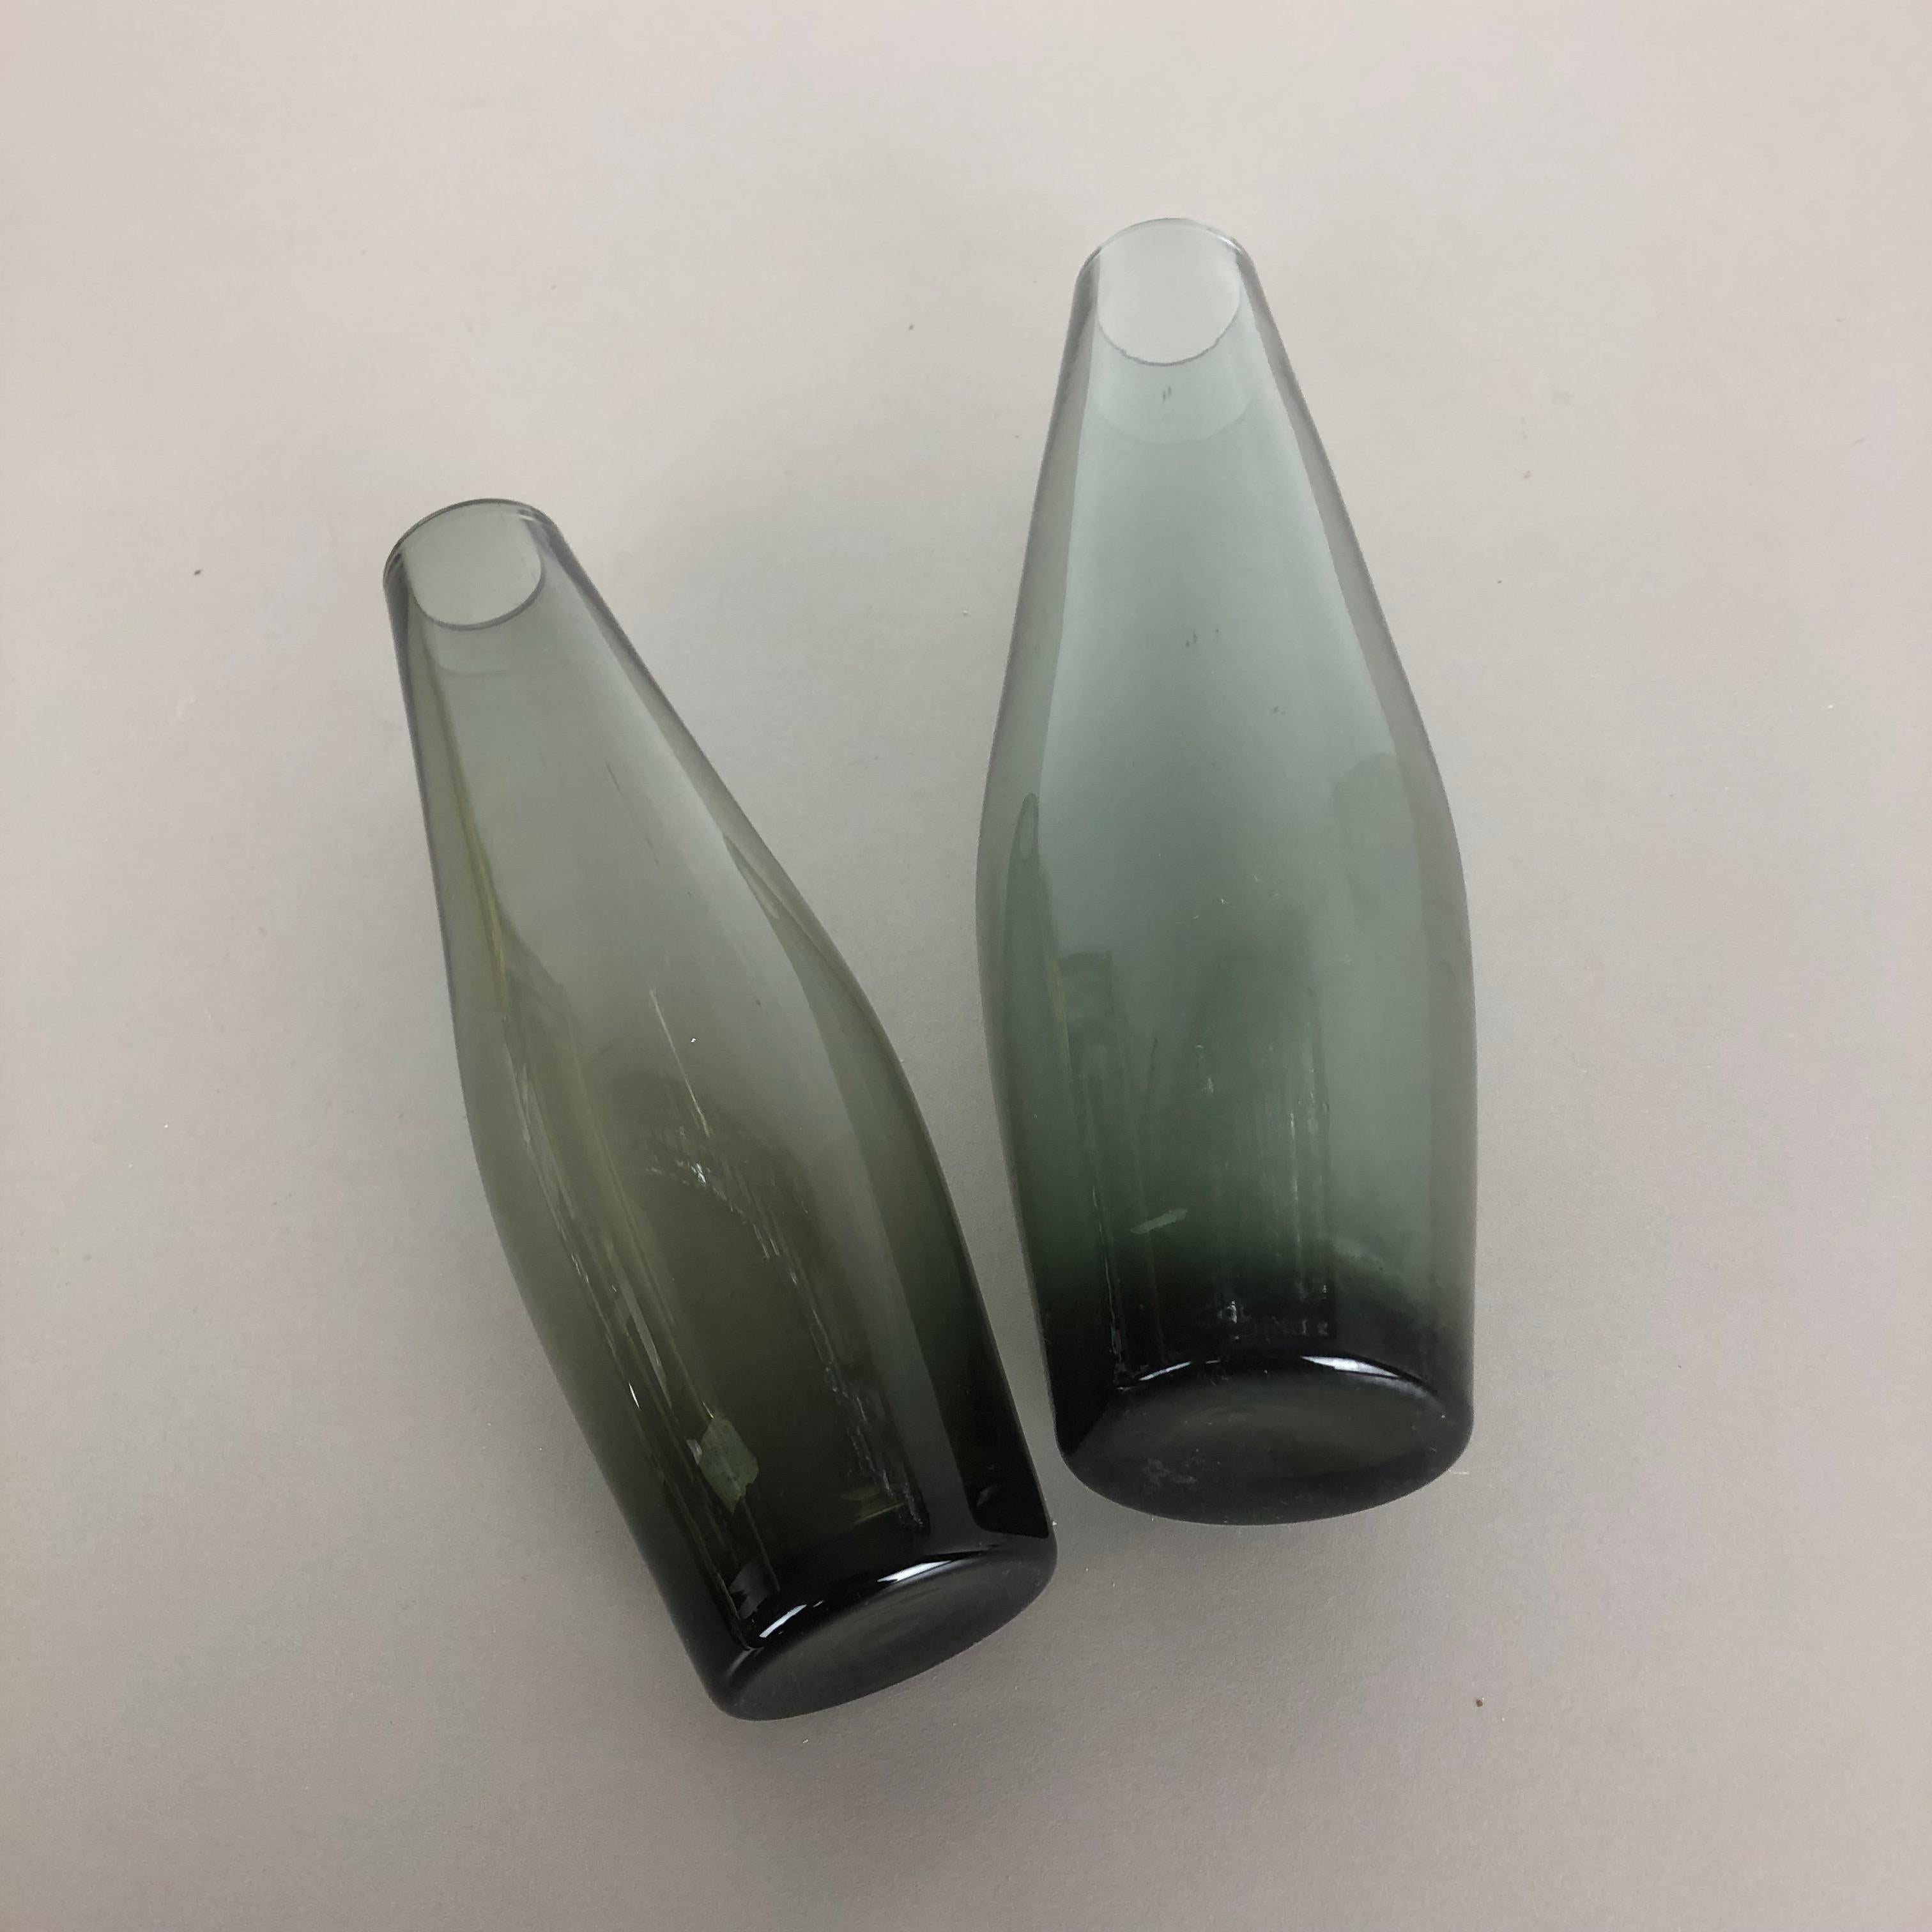 Vintage 1960s Set of 2 Turmaline Vases by Wilhelm Wagenfeld for WMF, Germany For Sale 2